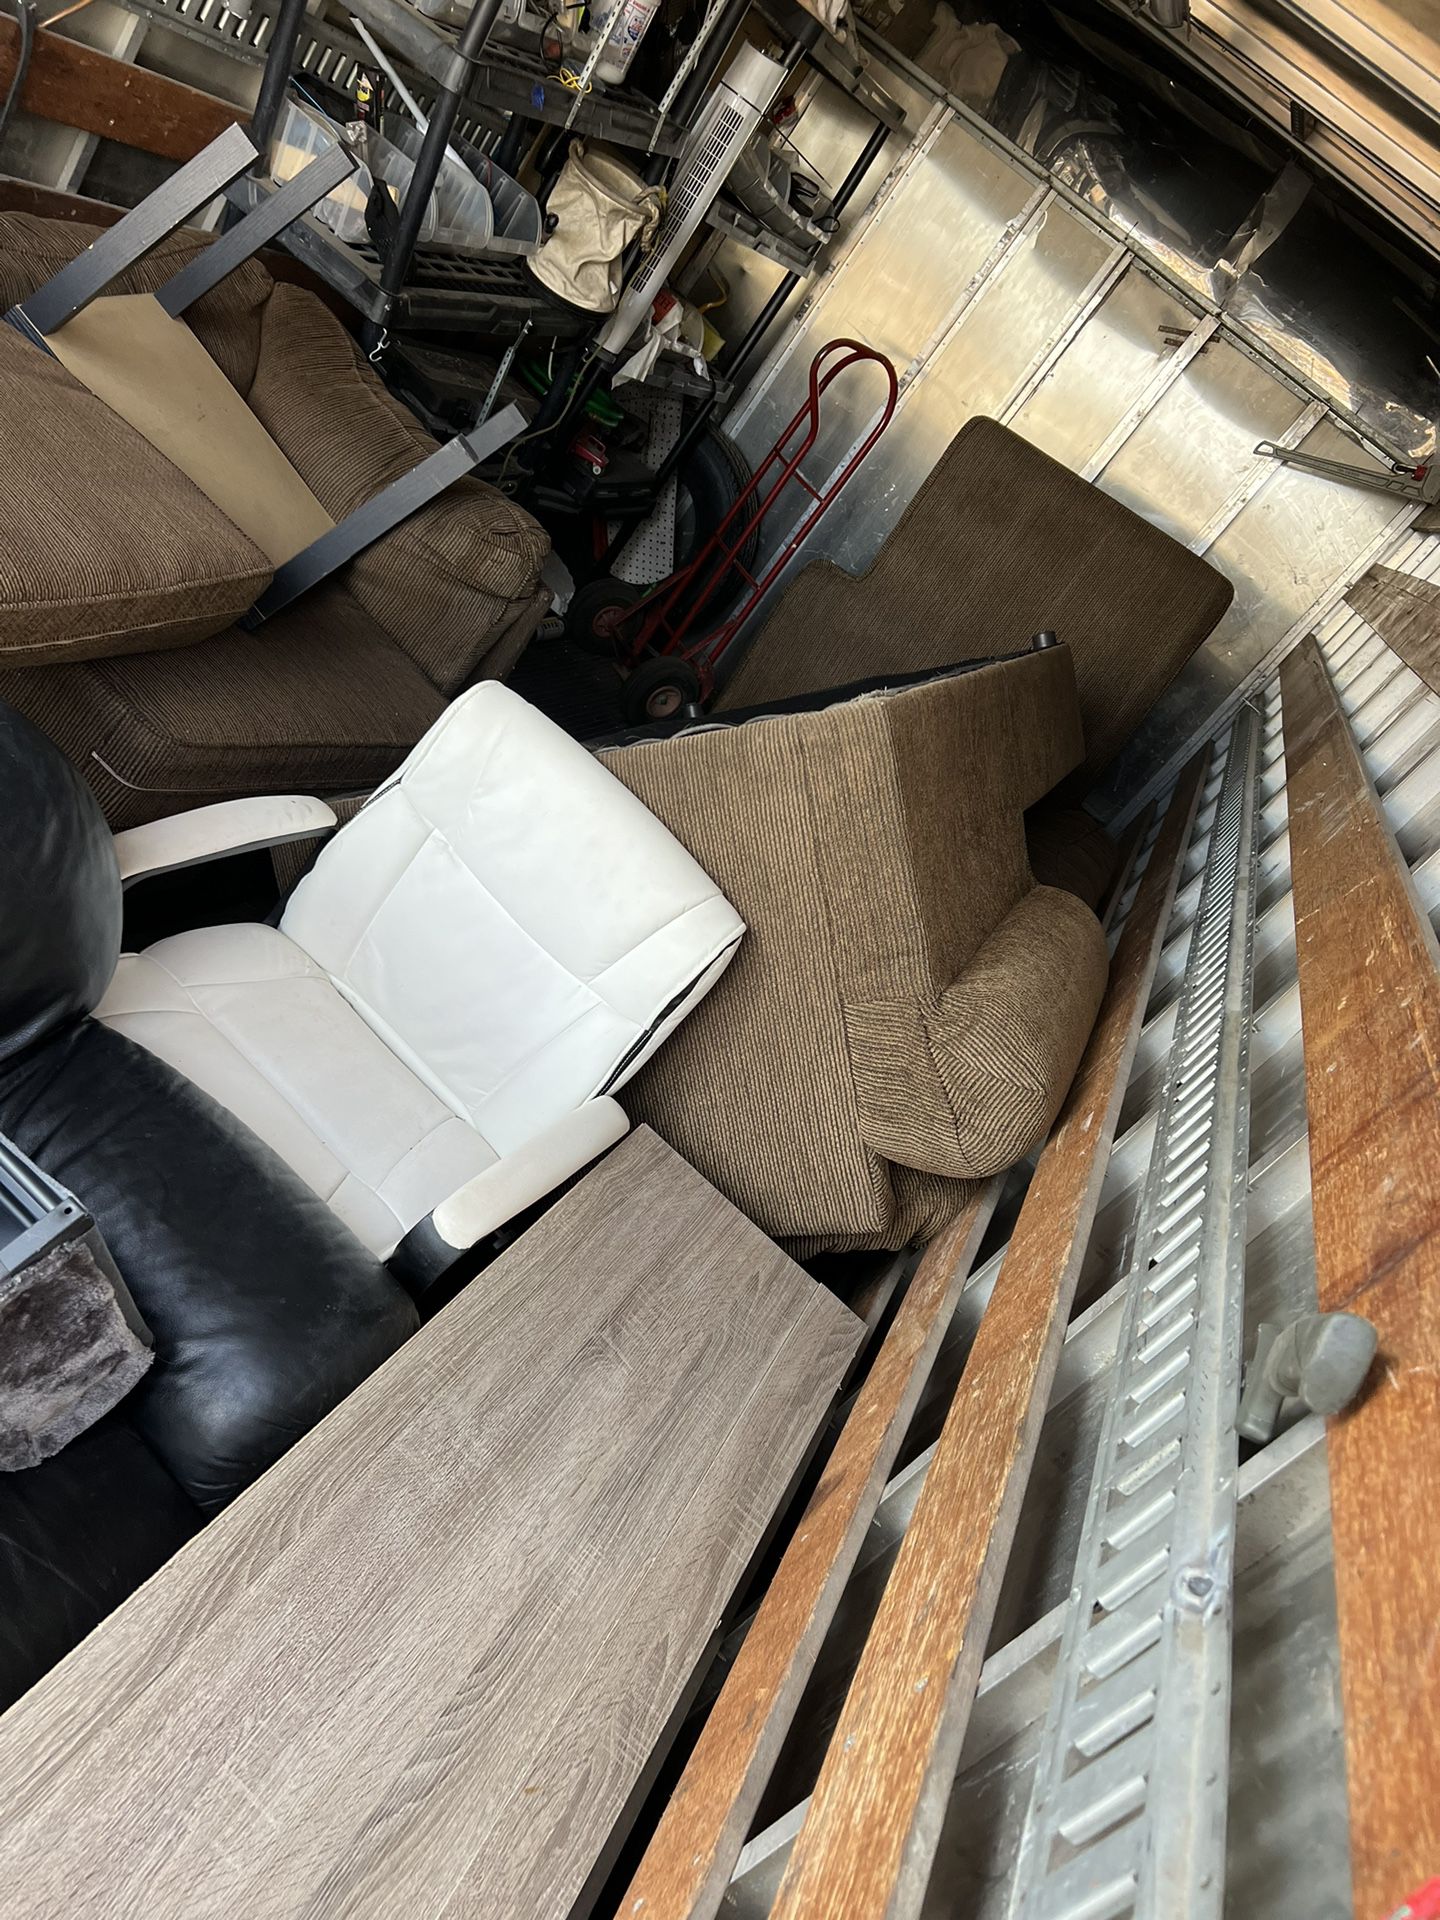 Furniture To Be Picked Up Or Delivered (Couch, Entertainment Center And More)